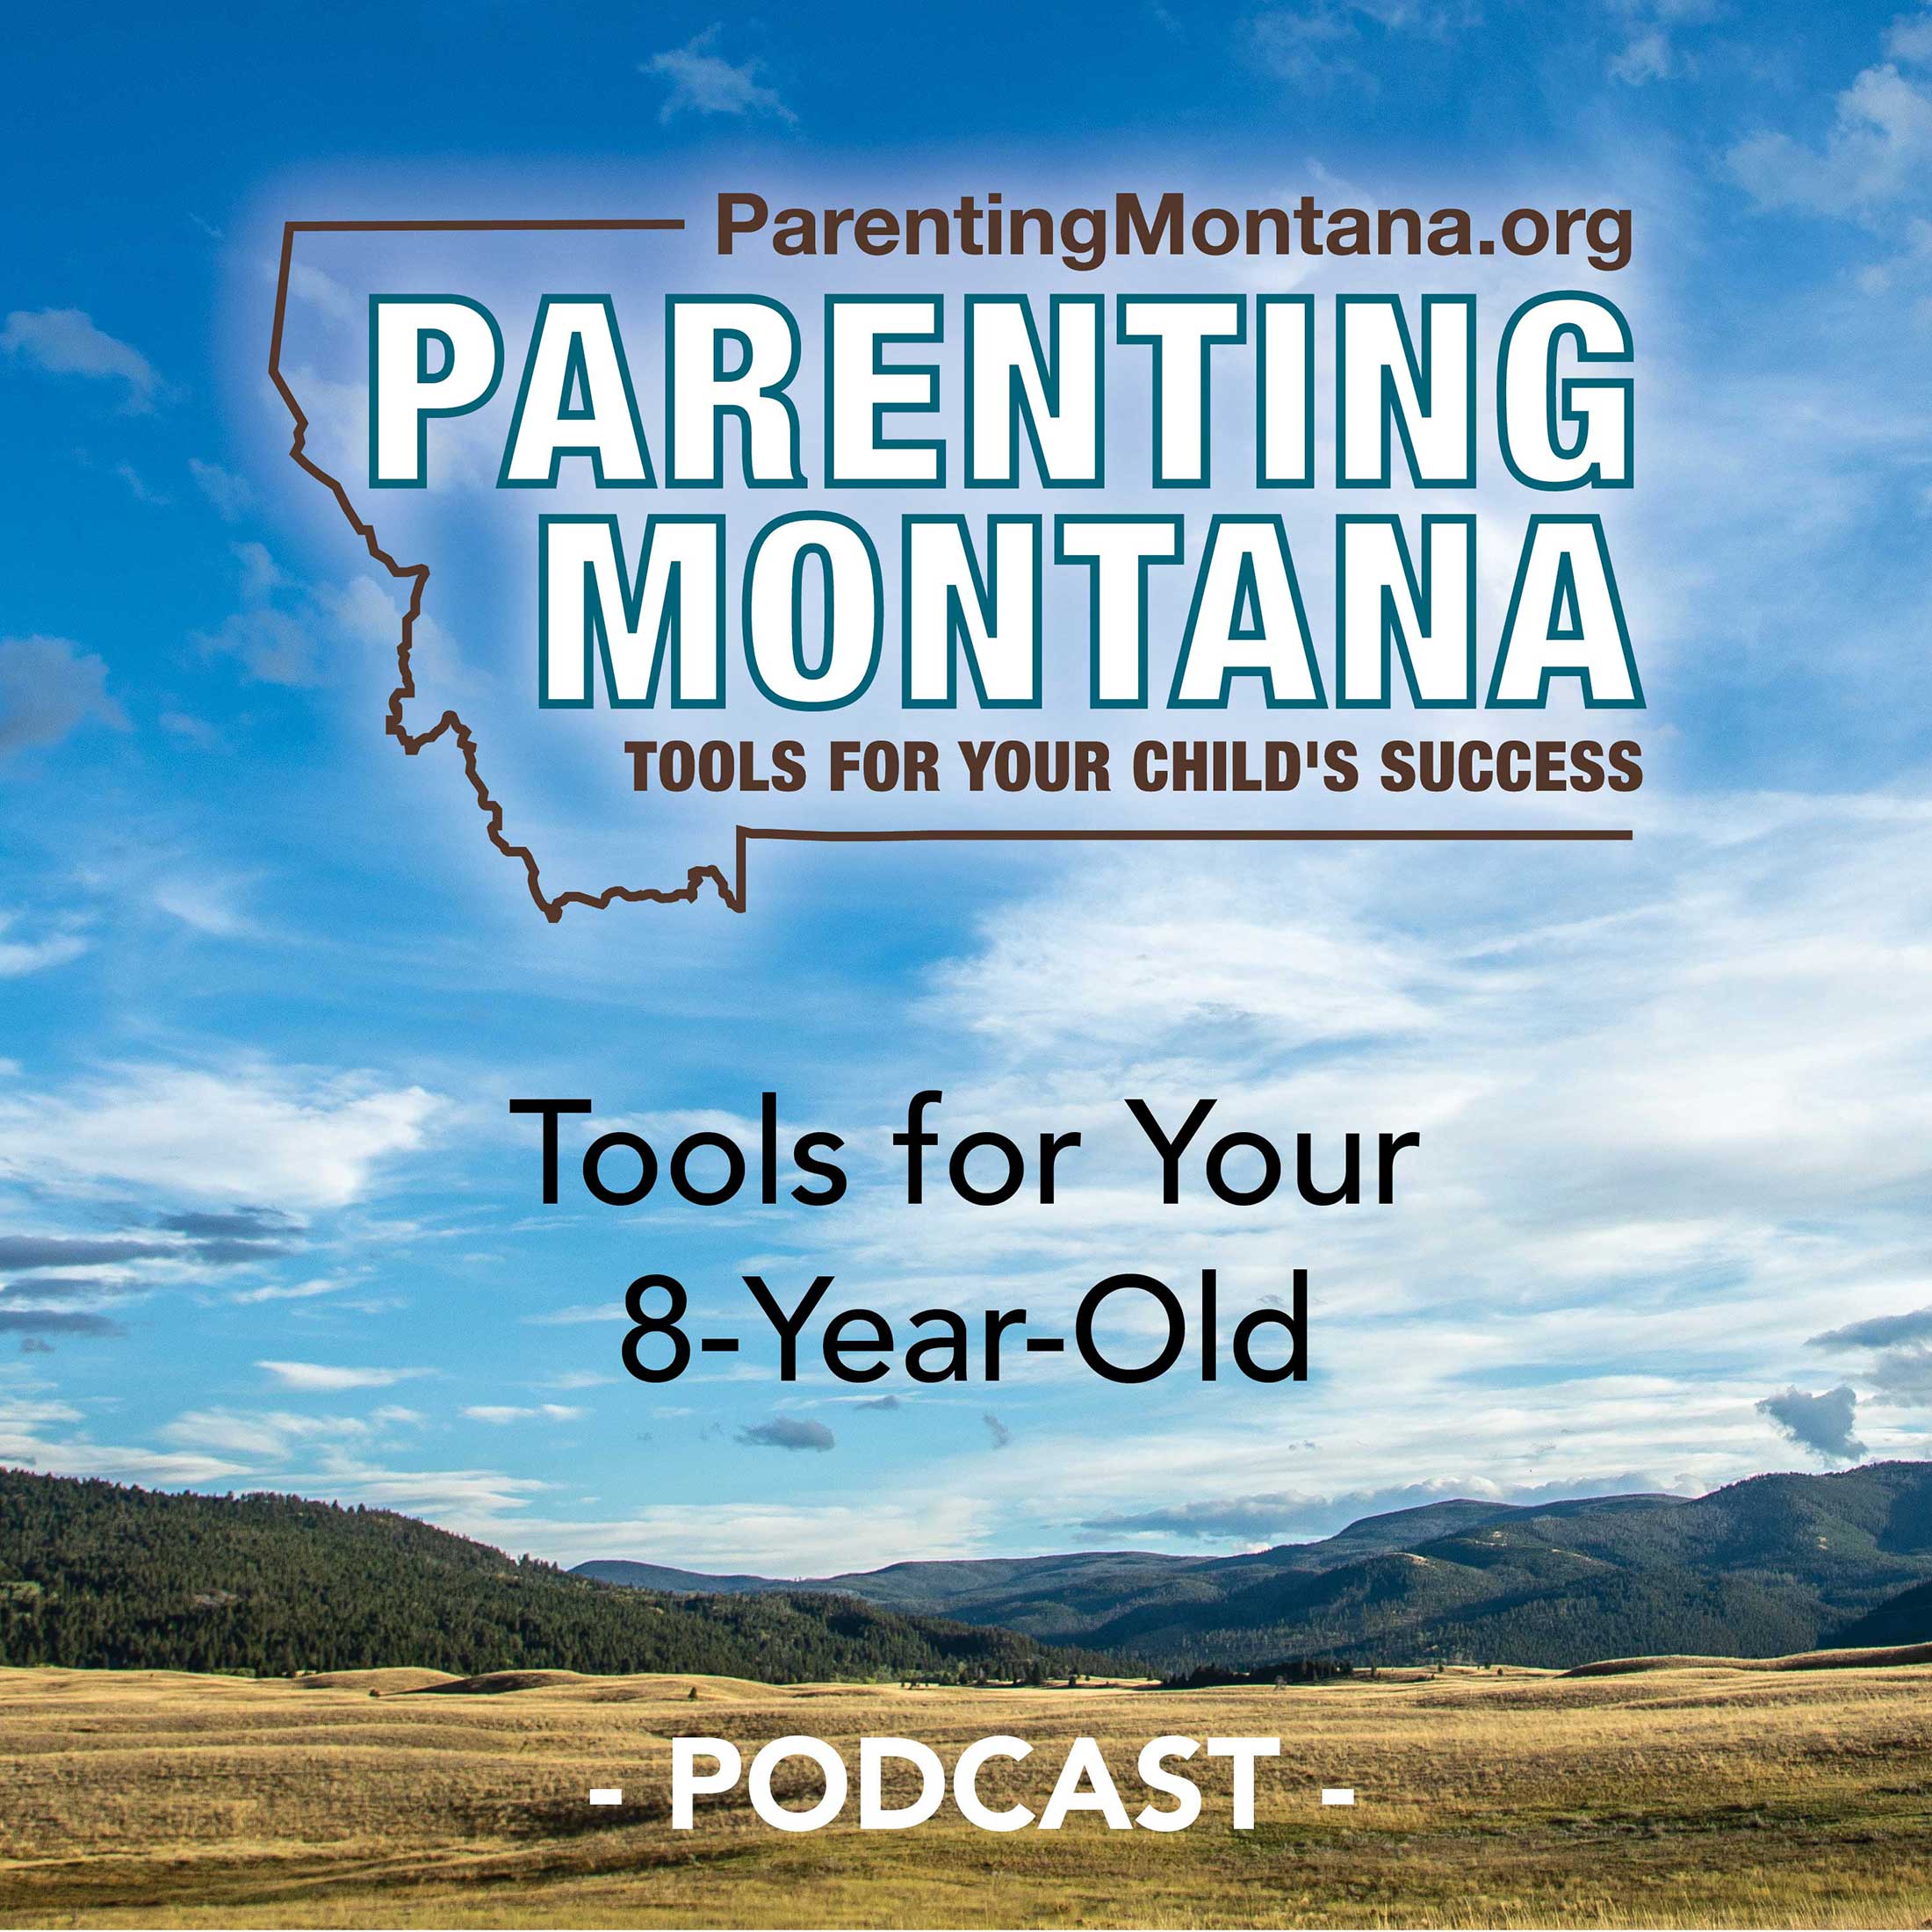 Artwork for podcast 8-Year-Old Parenting Montana Tools